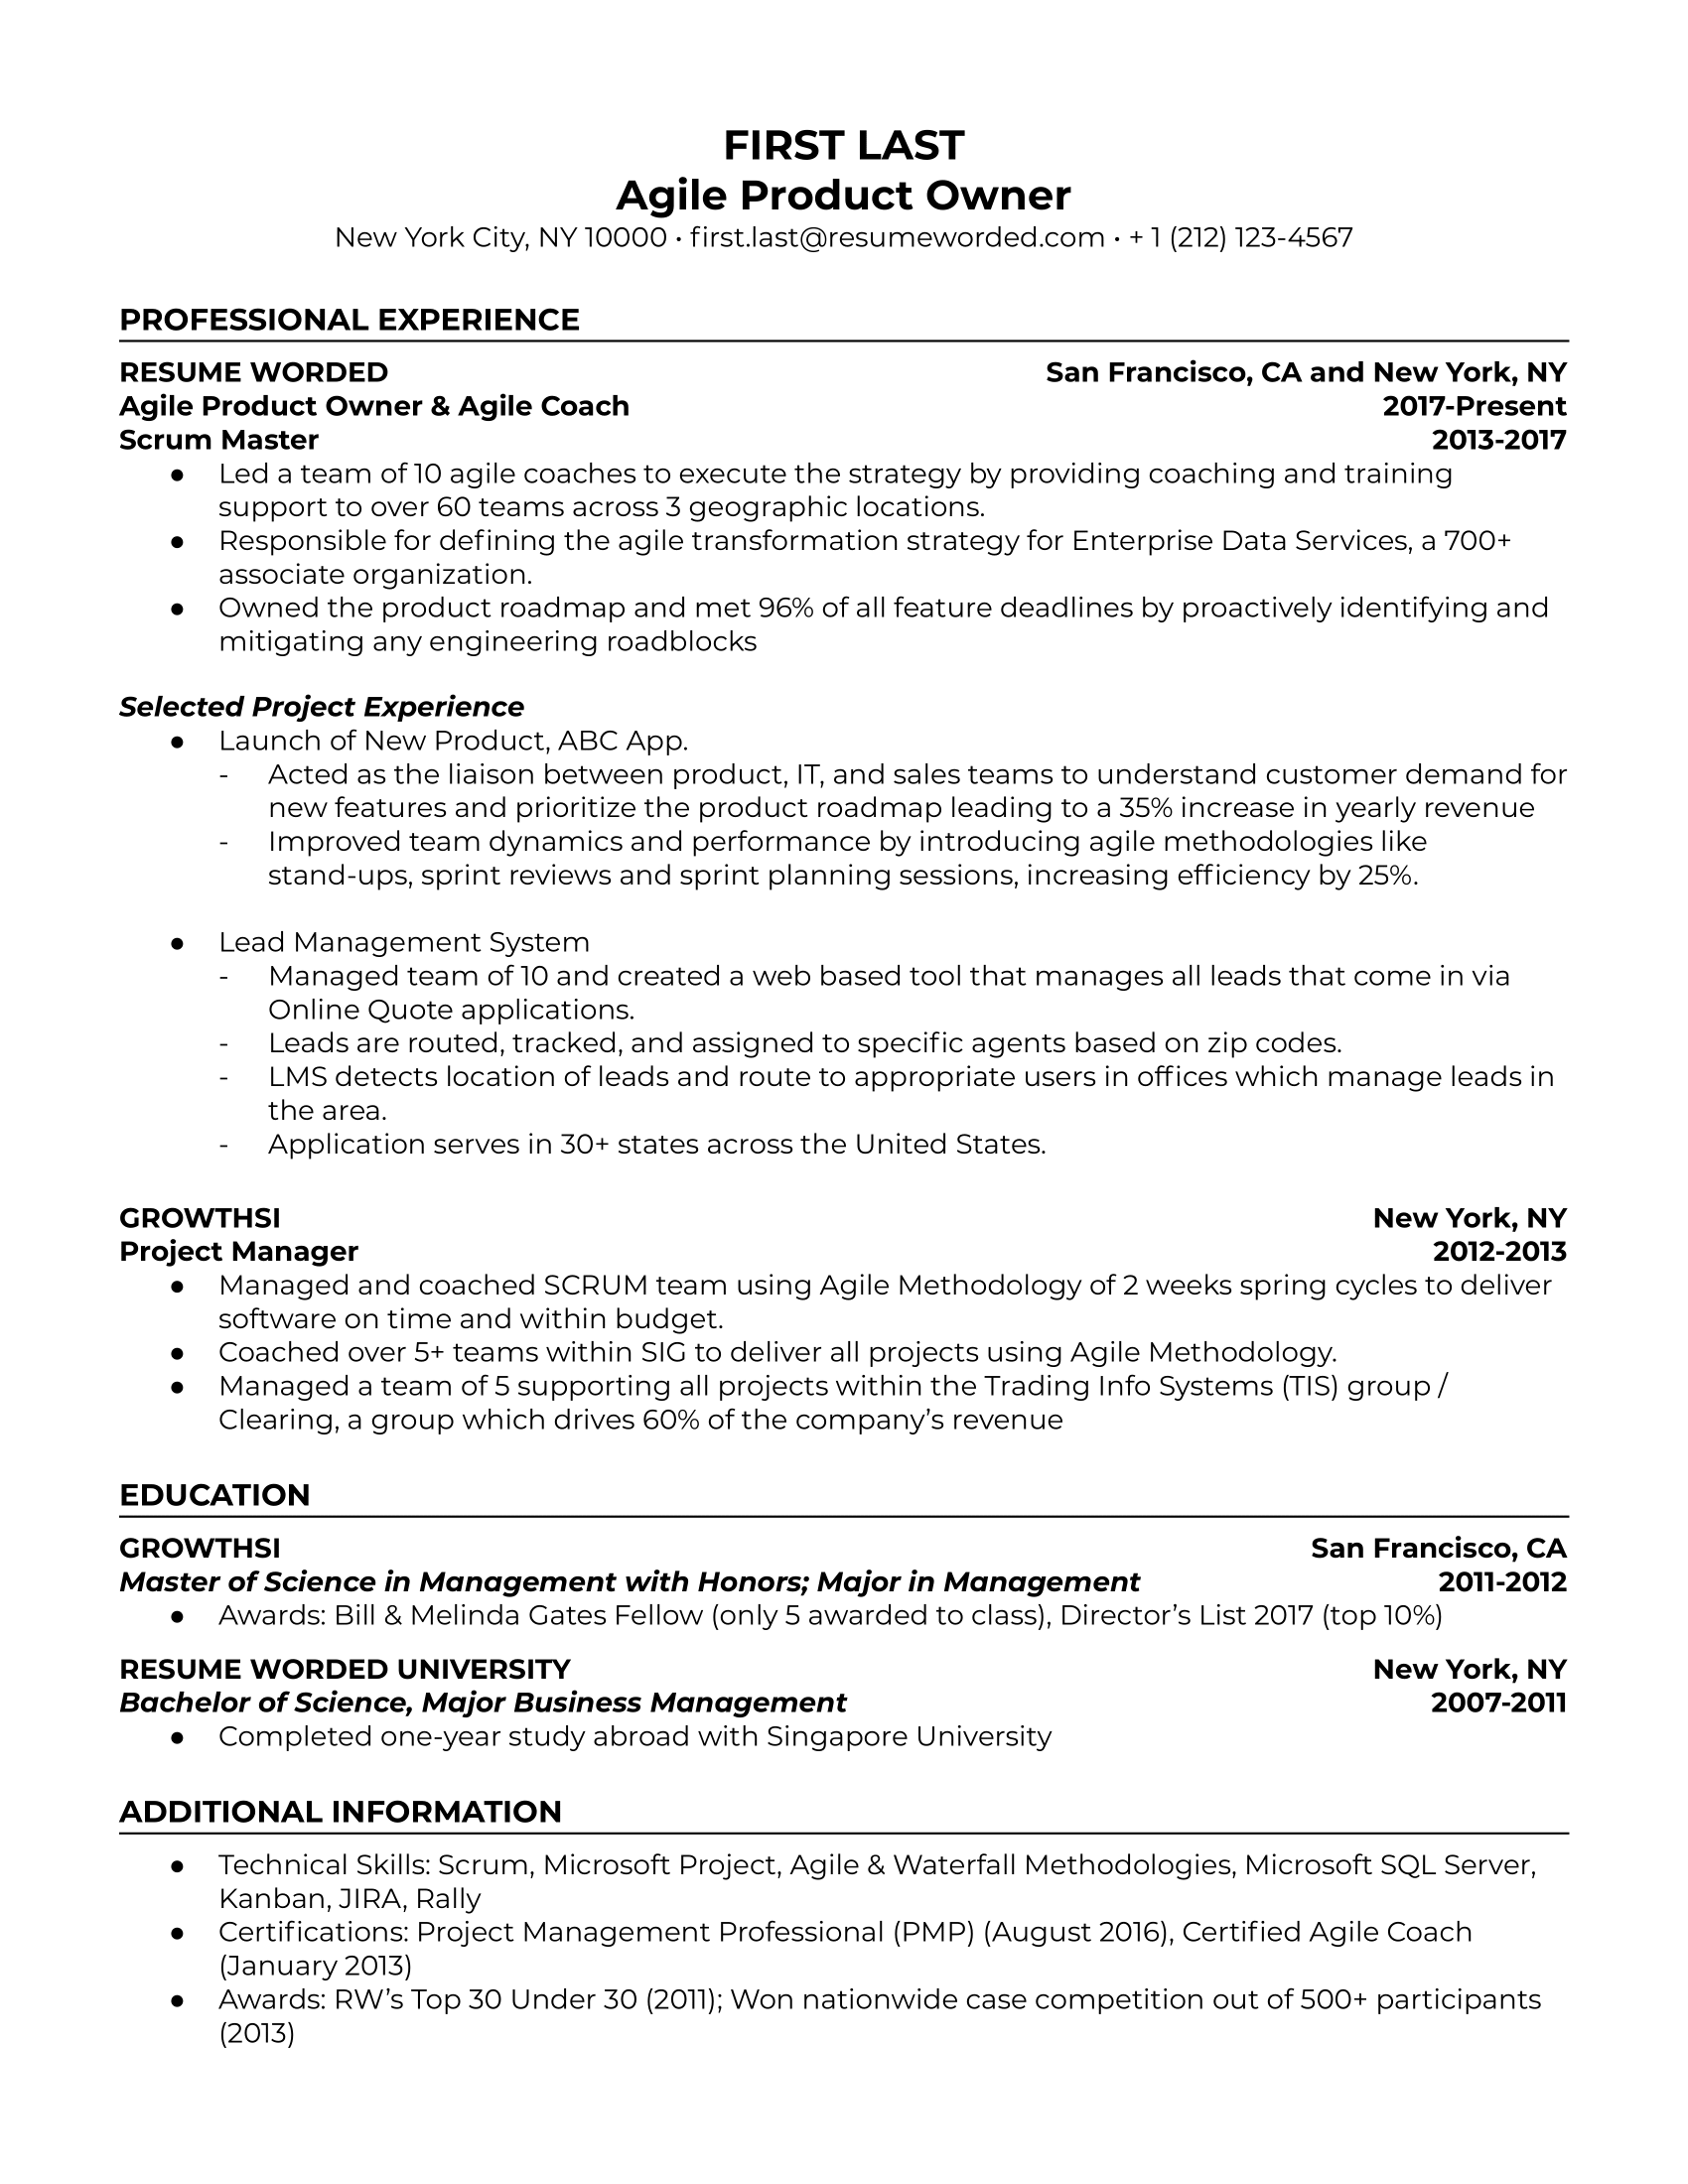 An Agile product owner resume template highlighting Agile experience